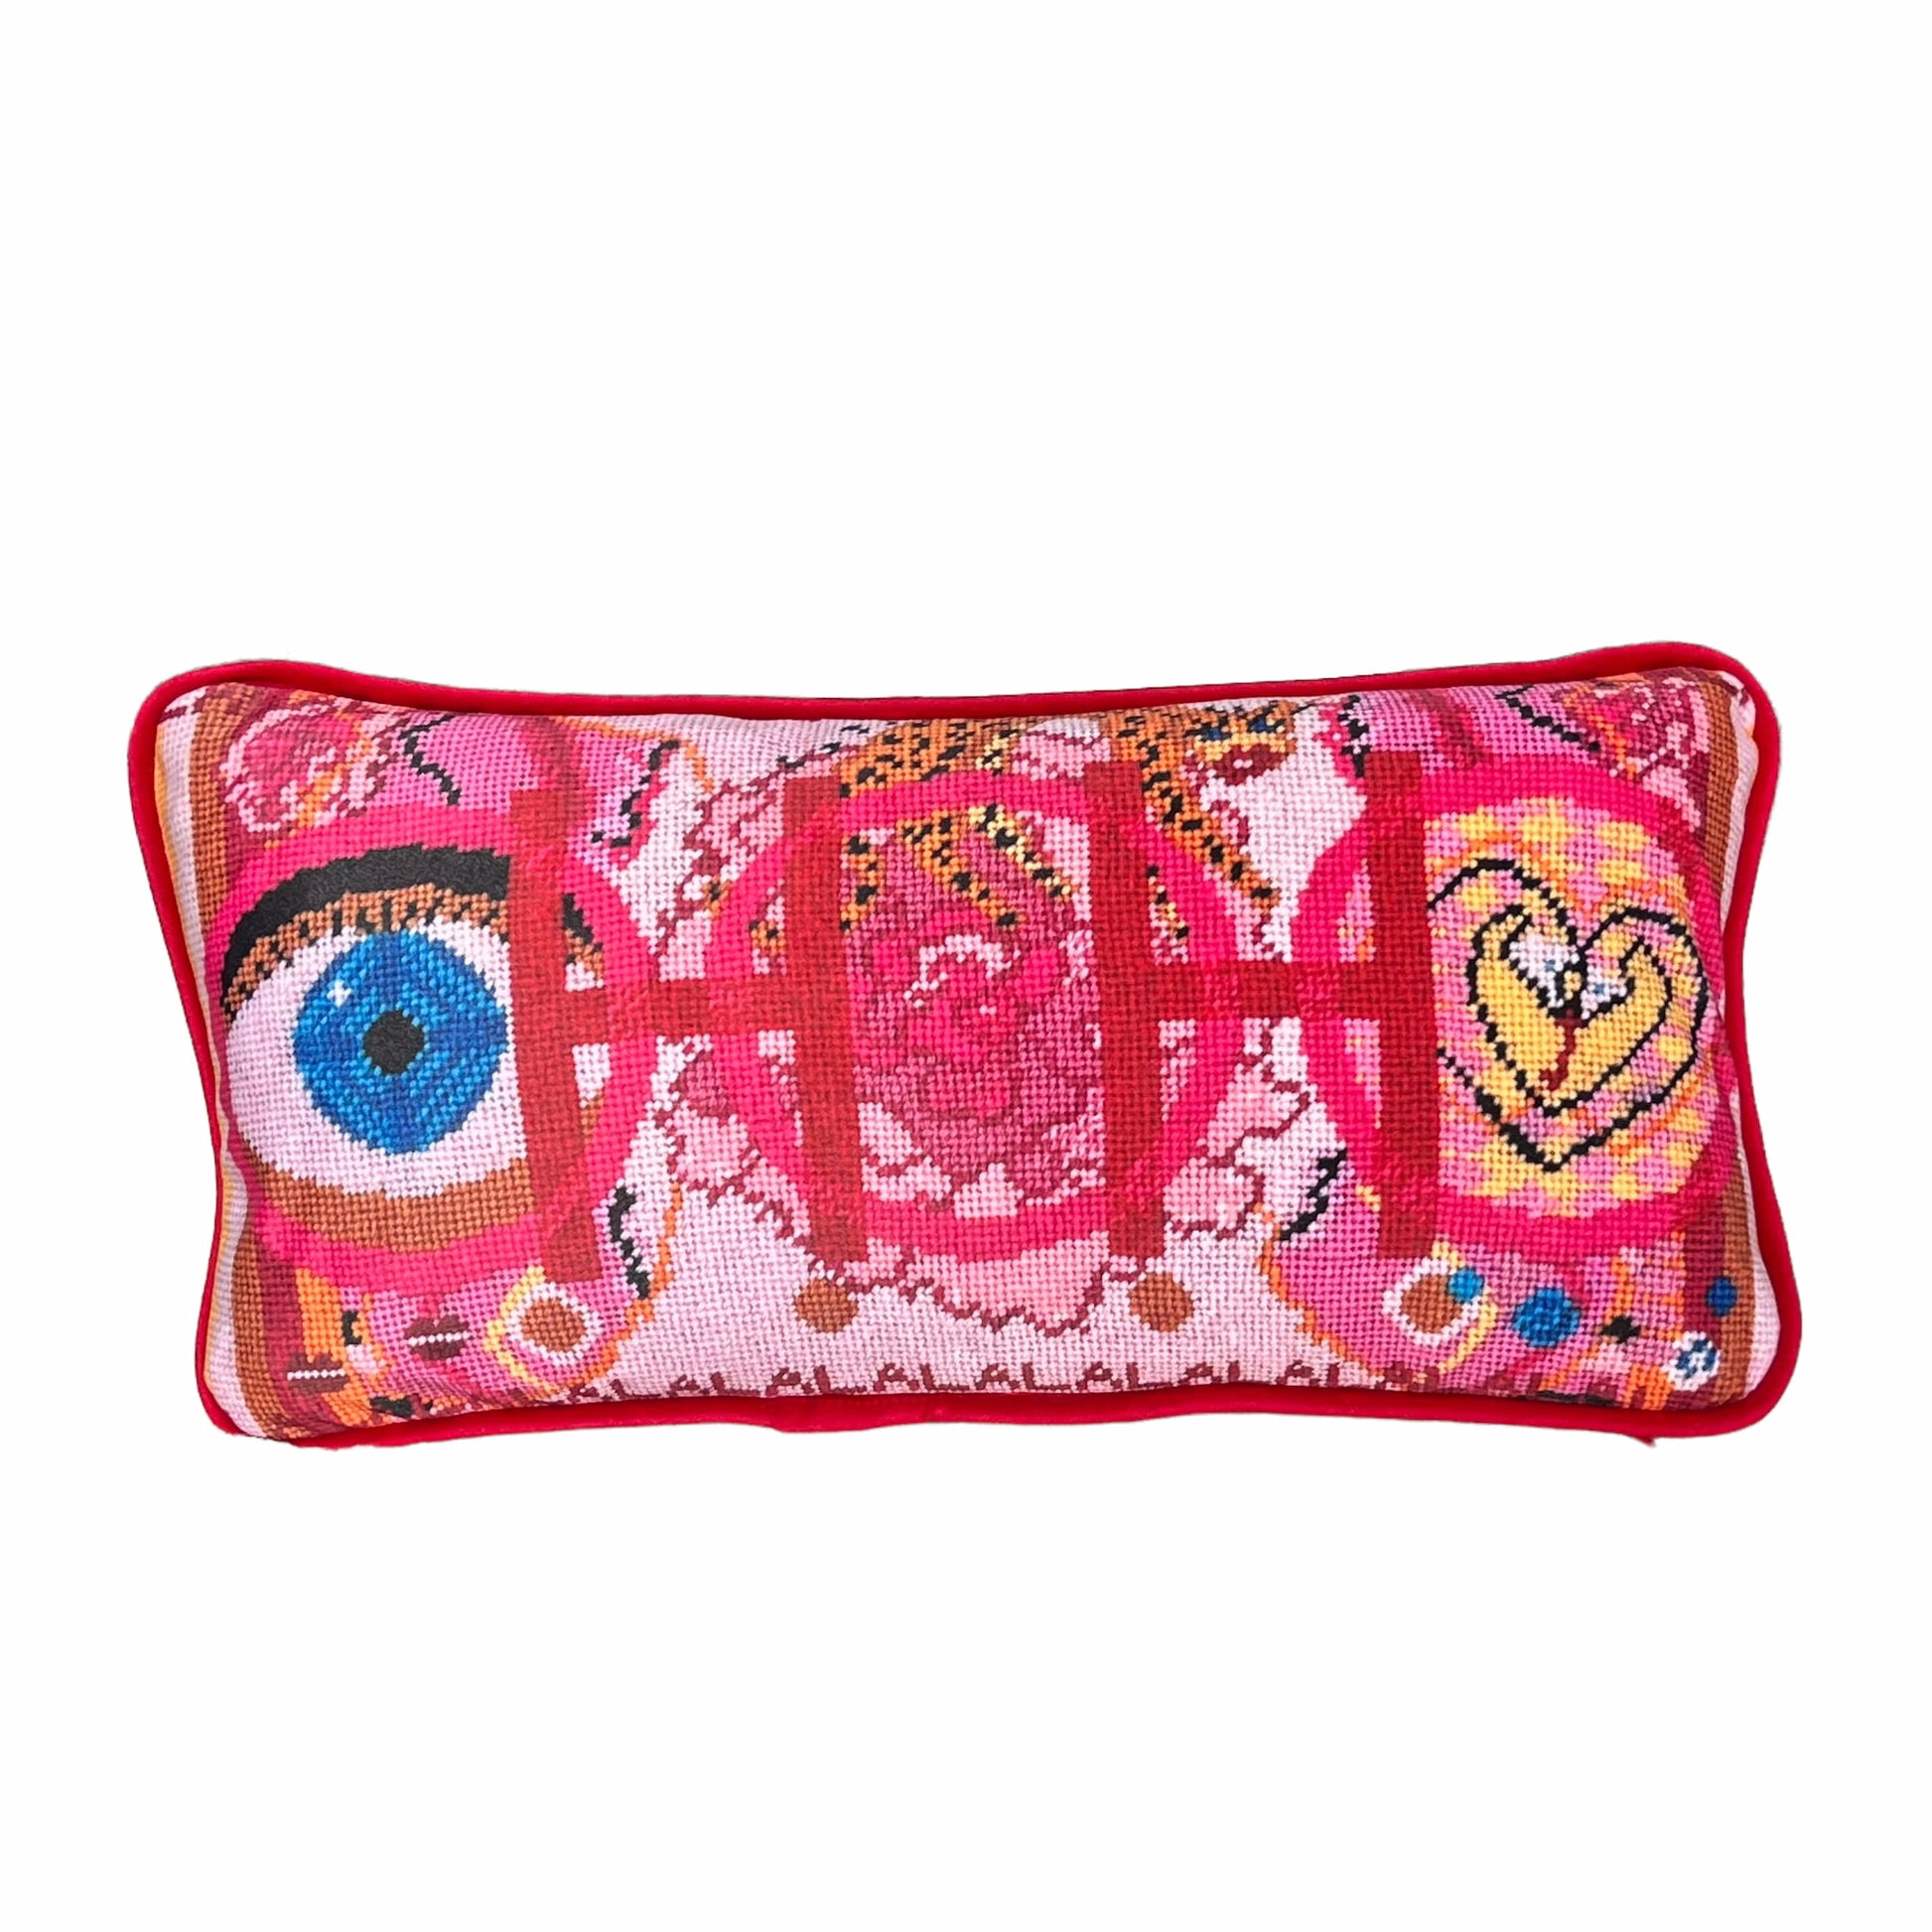 velvet pillow with pink and red colorful pattern, blue eye, cheetah, heart snakes, roses and lettering OOH in center with a LA LA LA border 